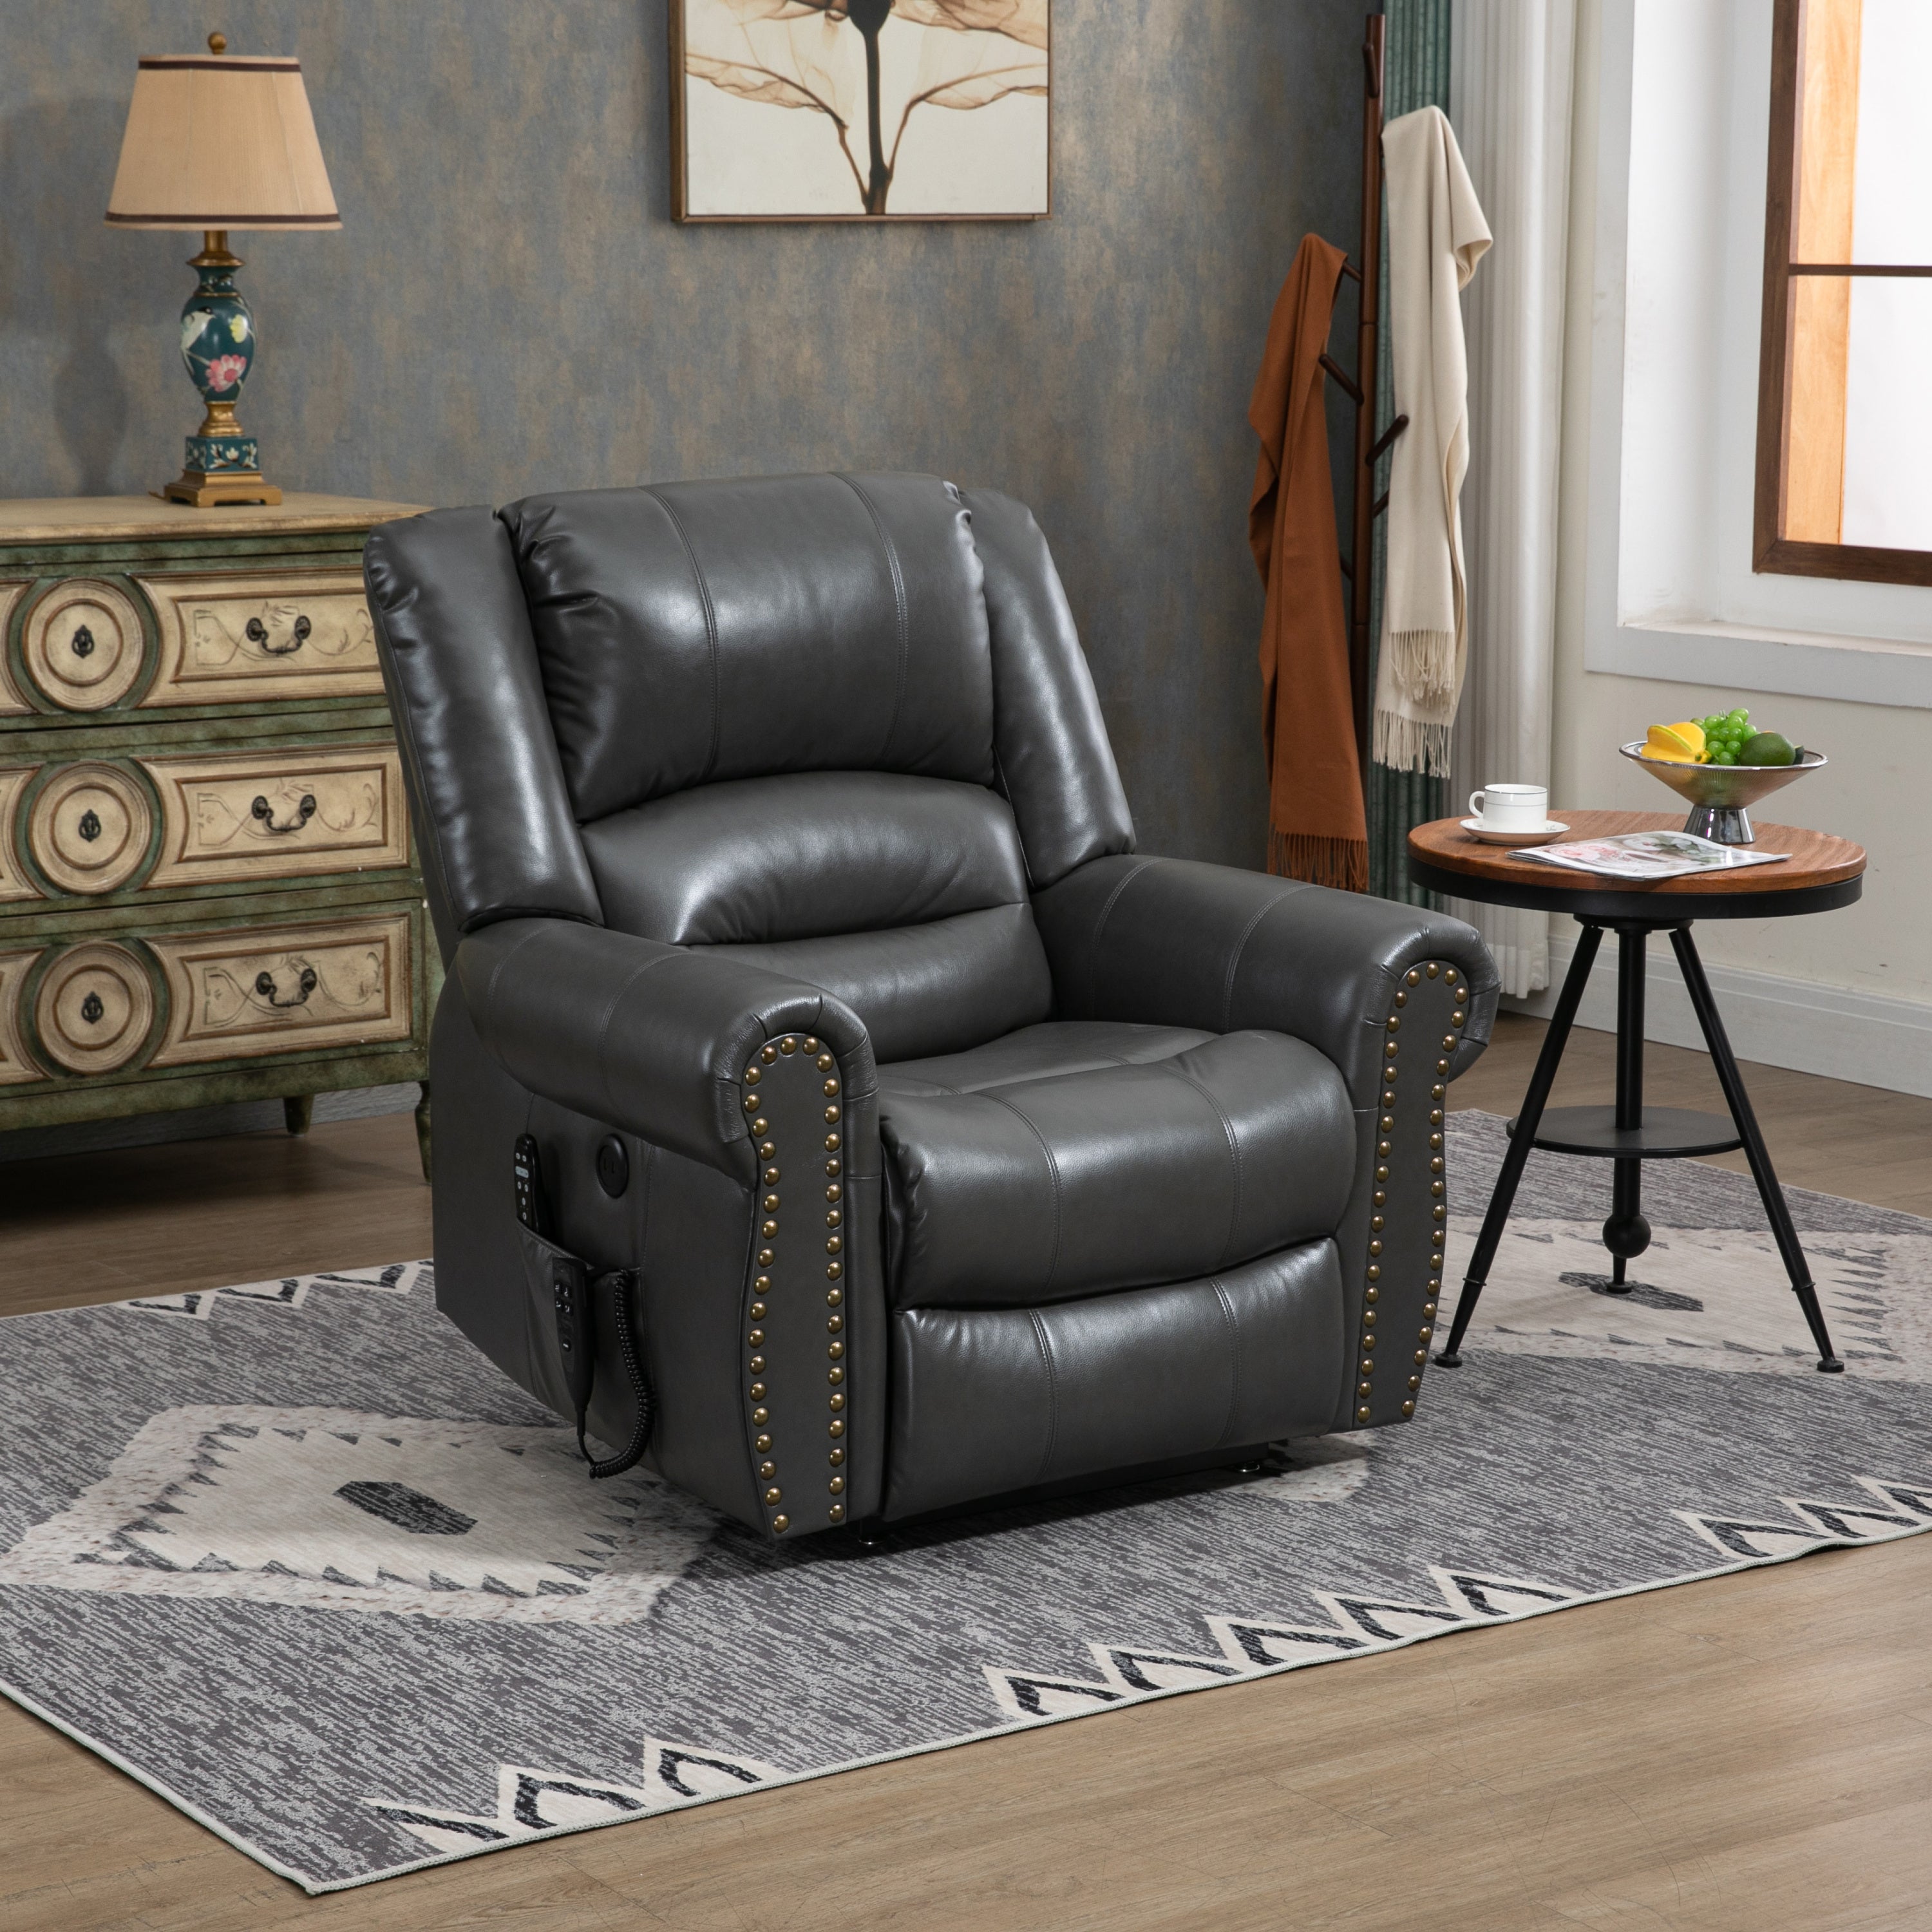 Grey Power Lift Recliner Chair with Heat, Massage, and Infinite Positioning, seated